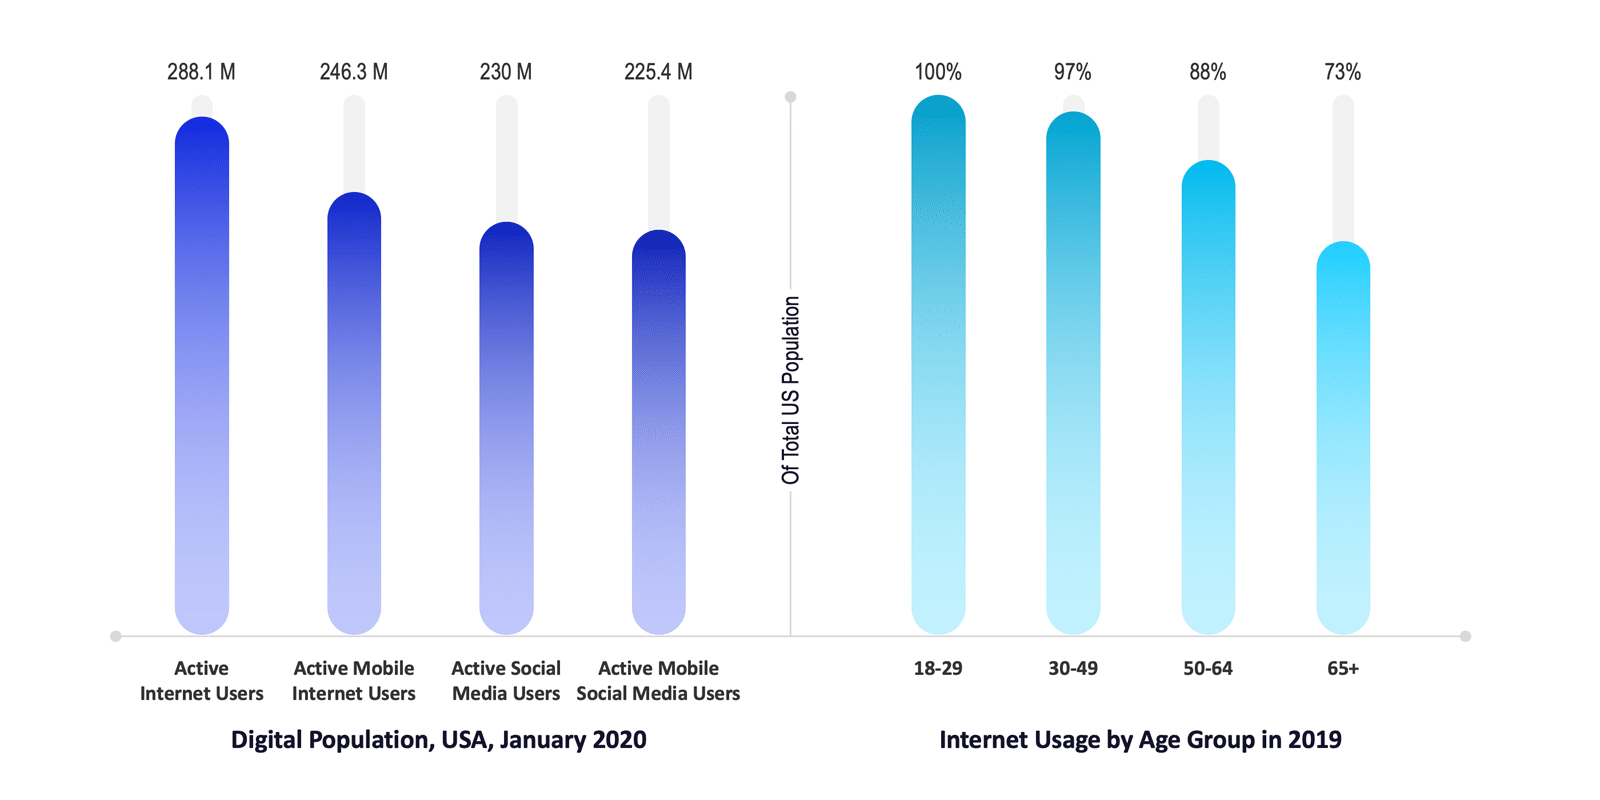 Digital Population and Internet Usage by Age Group in the USA